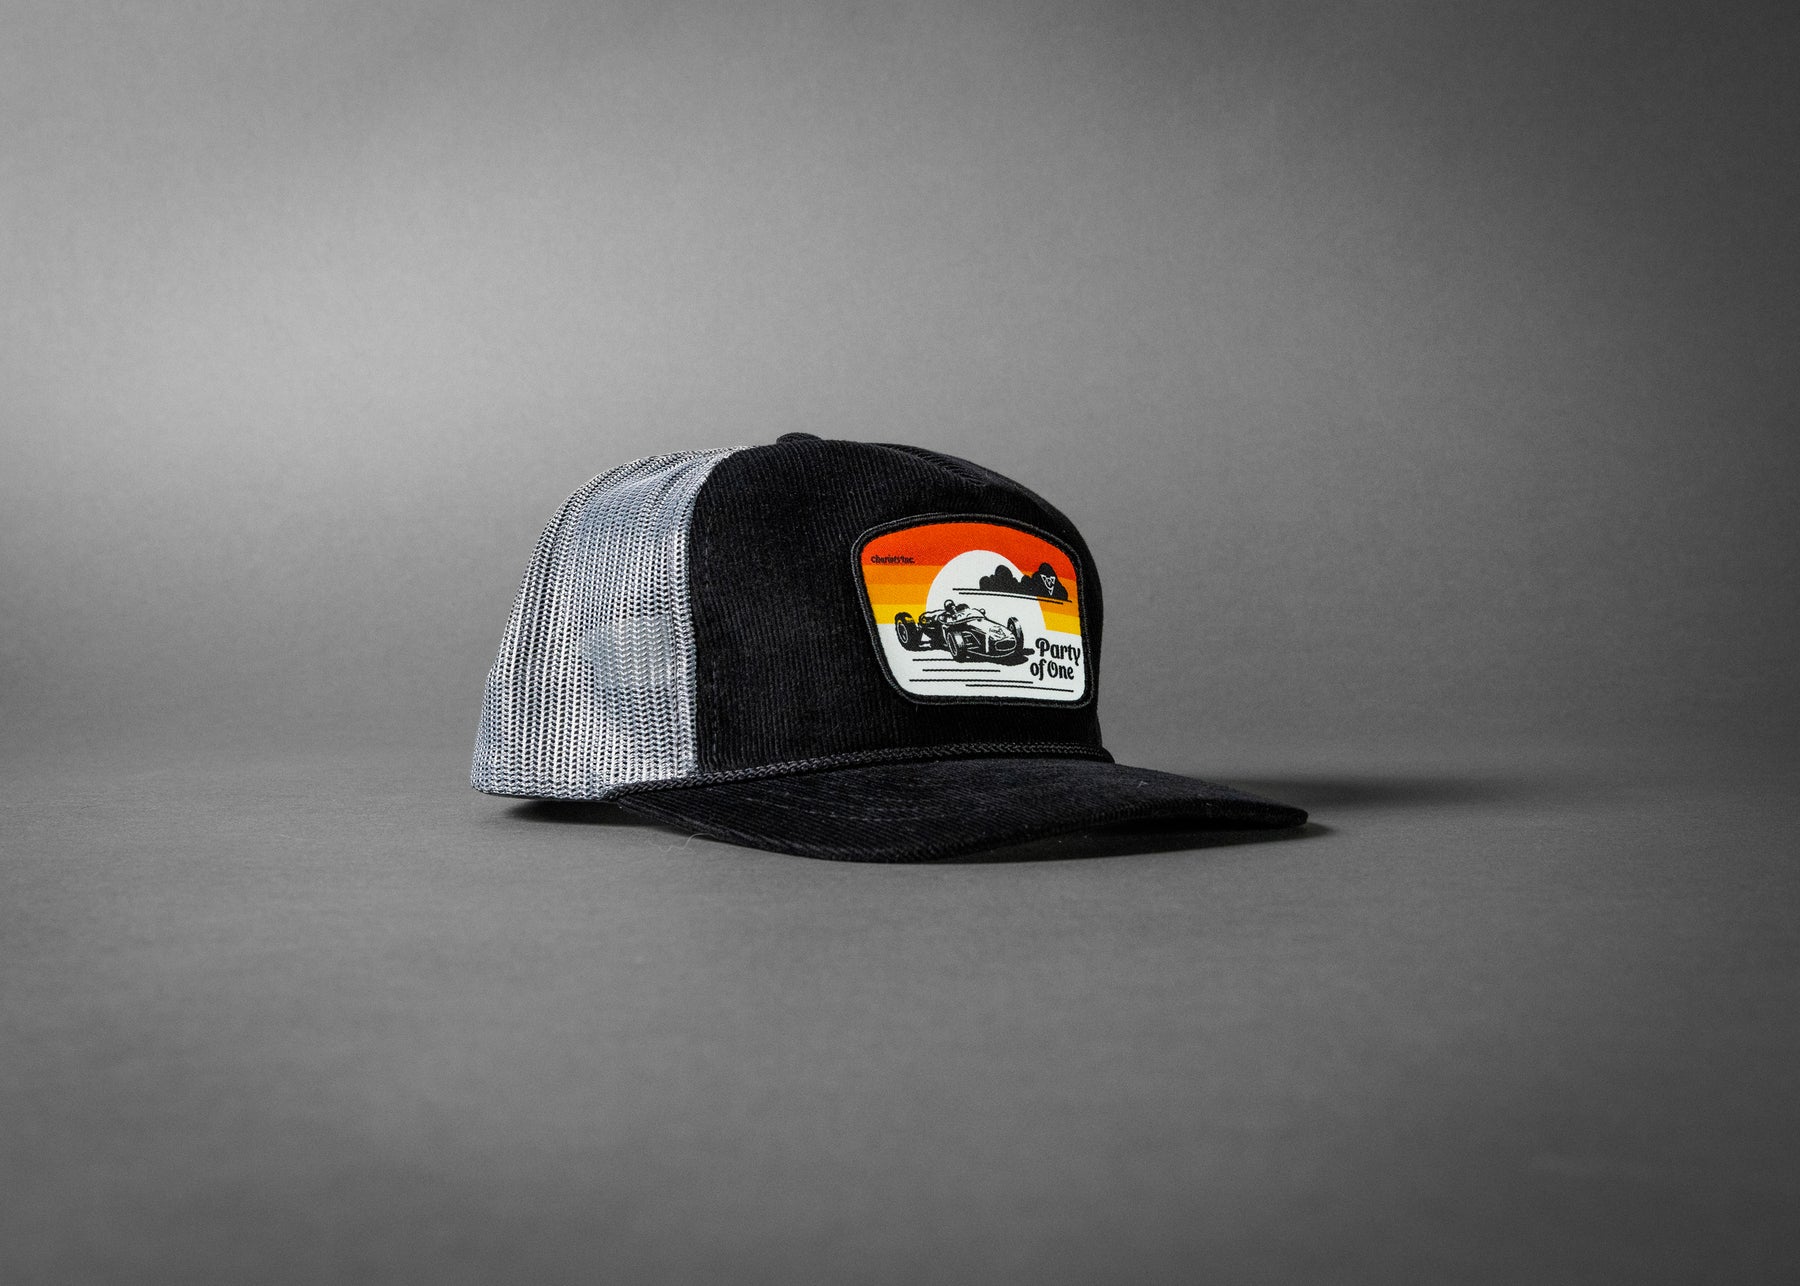 PARTY OF ONE (Black/Charcoal Corduroy Trucker Hat)